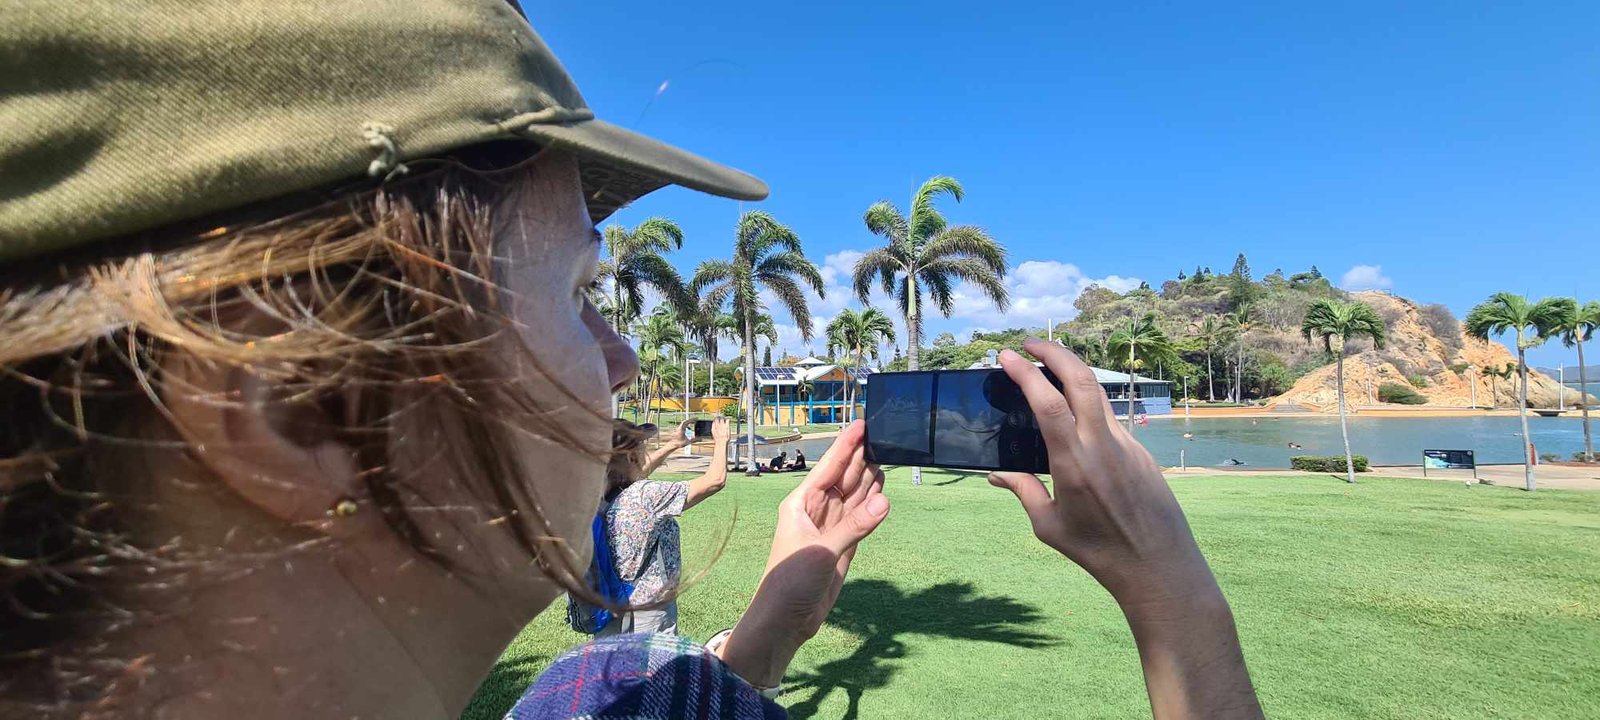 phone photography workshop Townsville